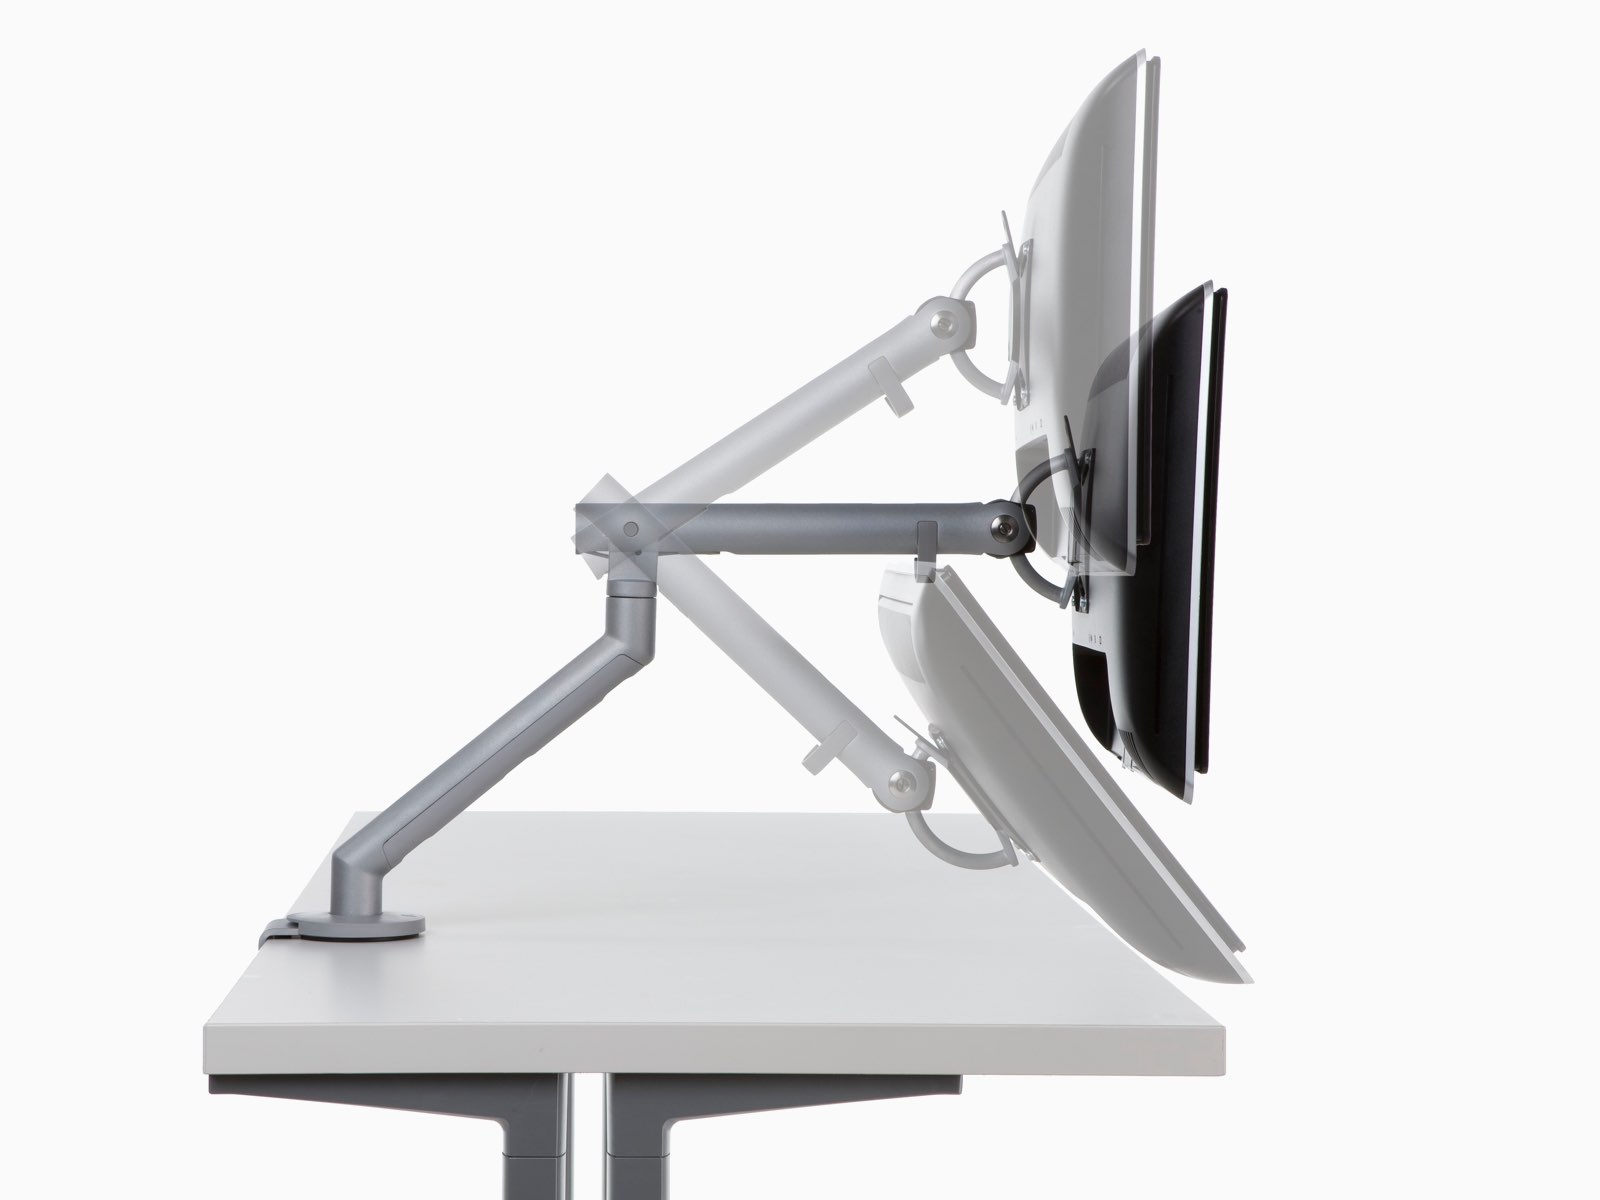 New-in-box Flo Dynamic Monitor Arm Herman Miller Clamp/Fix not included 